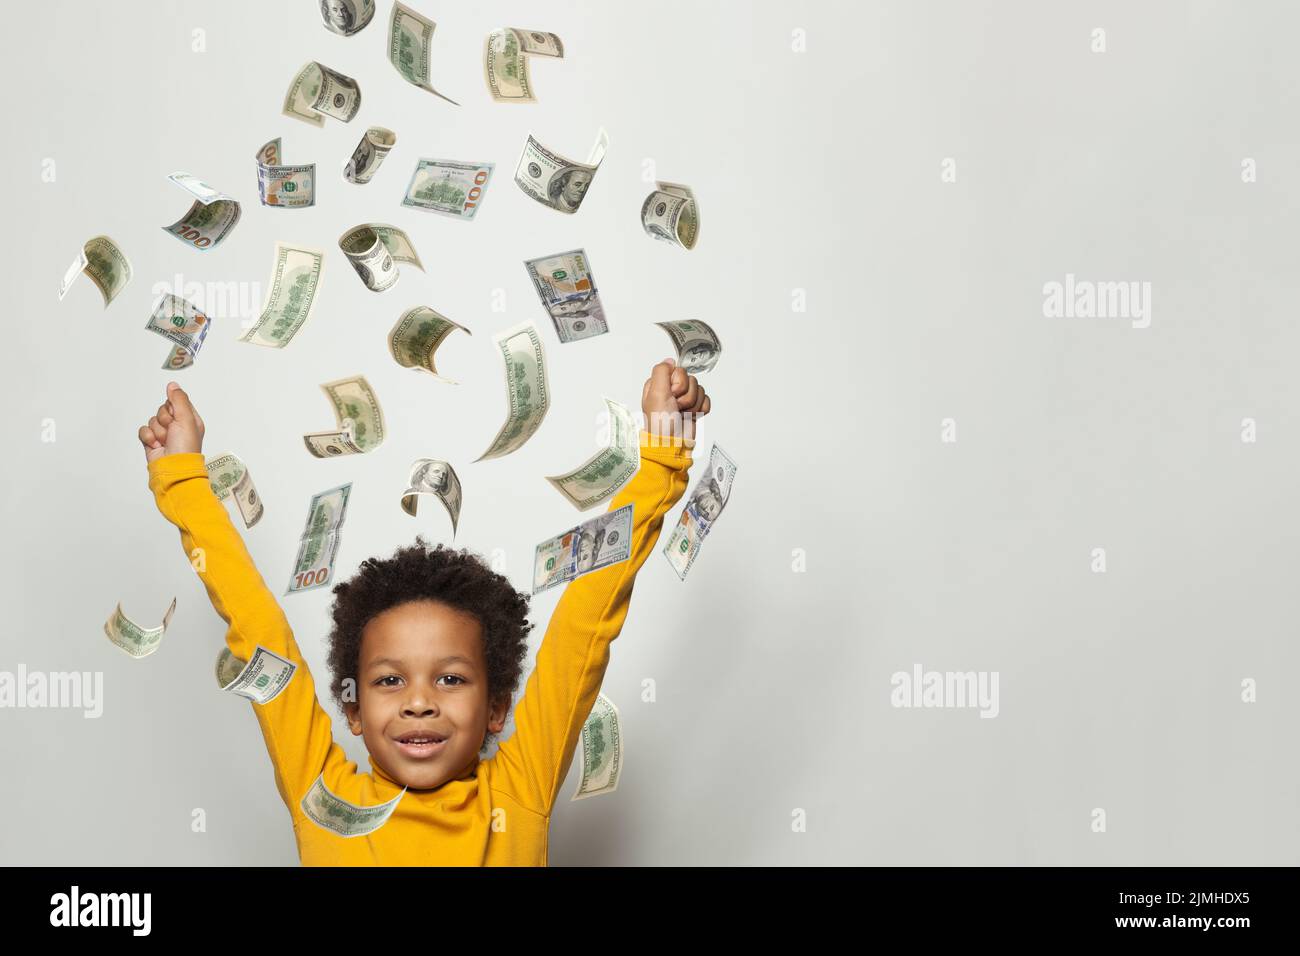 Kid screaming super excited. Happy young child celebrating success under money rain falling down dollar bills banknotes Stock Photo